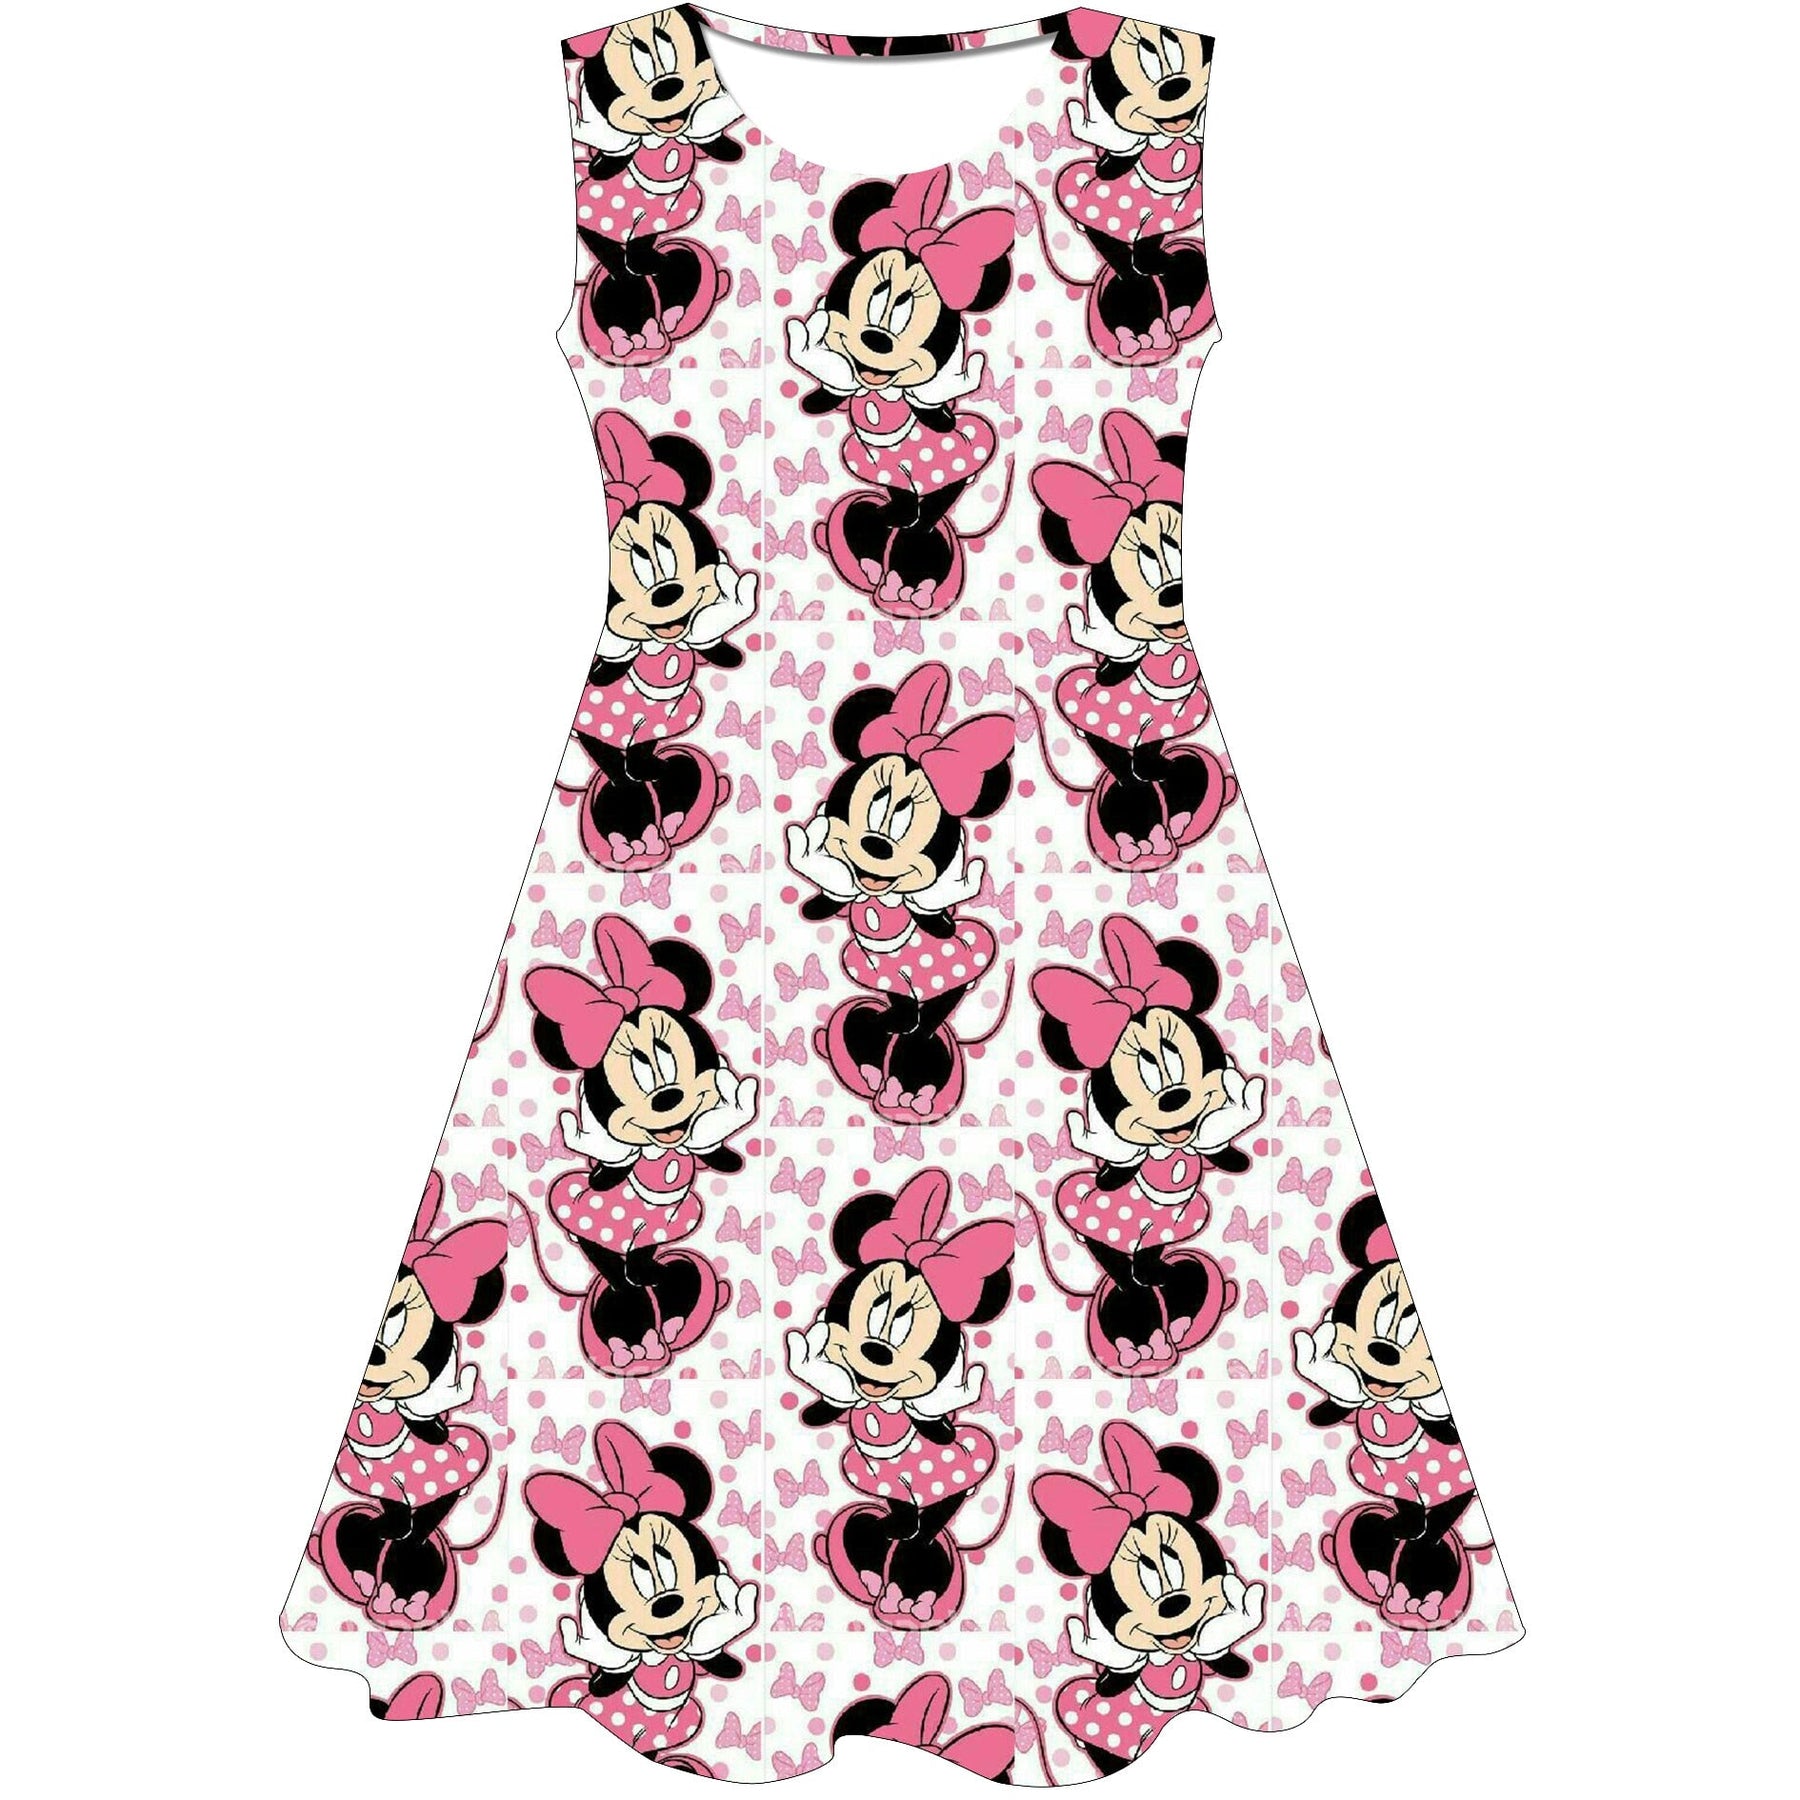 Christmas Dress Girls Clothes Minnie Mouse Birthday Party Kids Dresses for Girls Halloween Carnival Easter Princess Costume 0-8Y